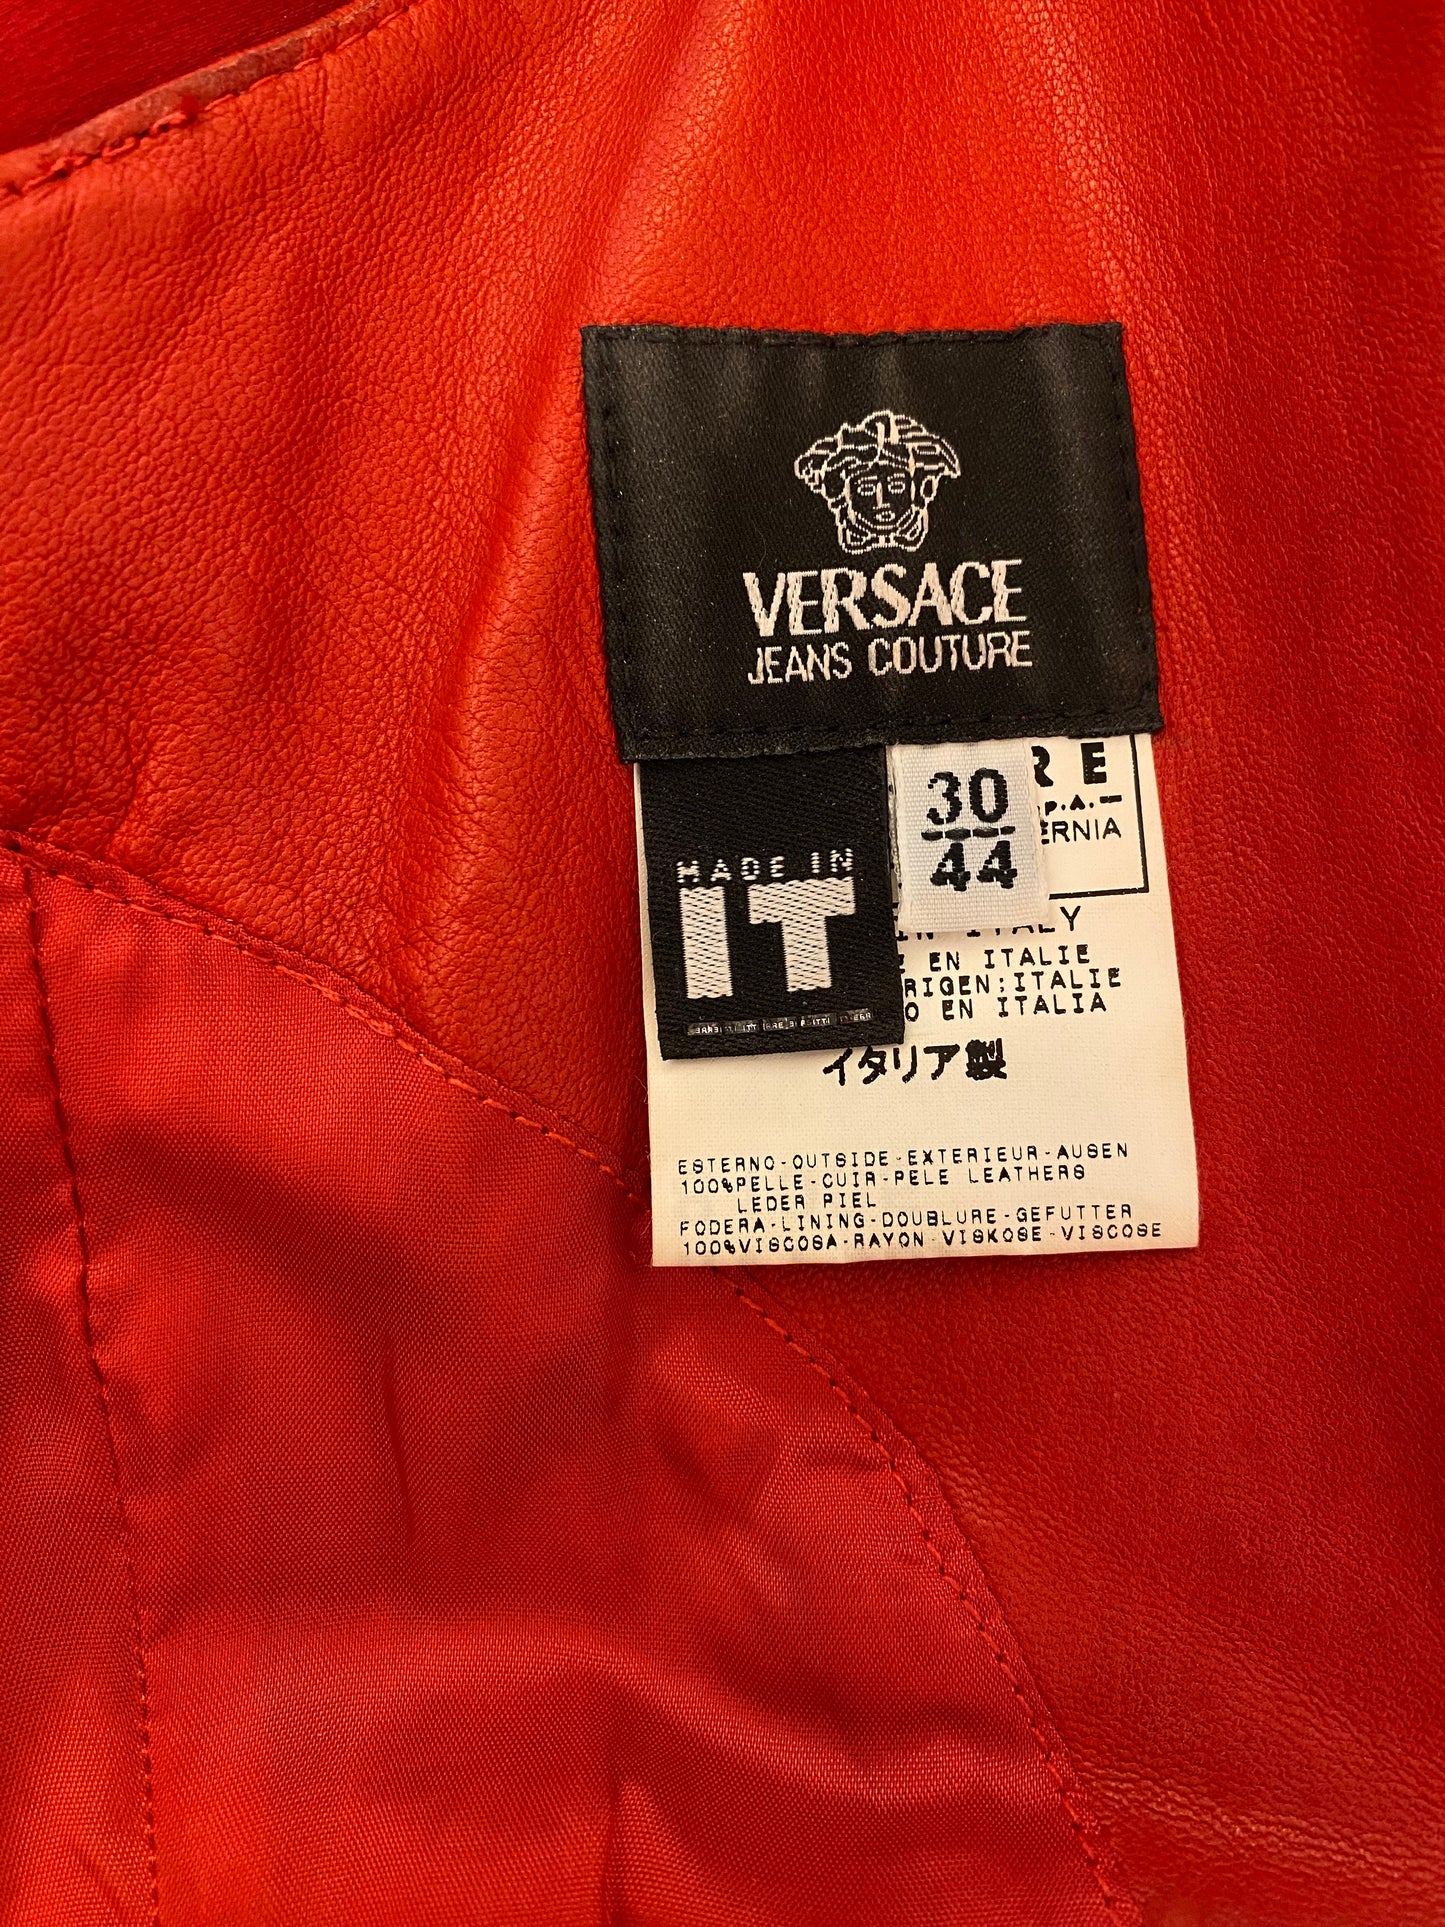 VERSACE Leather Red Dress Size 36